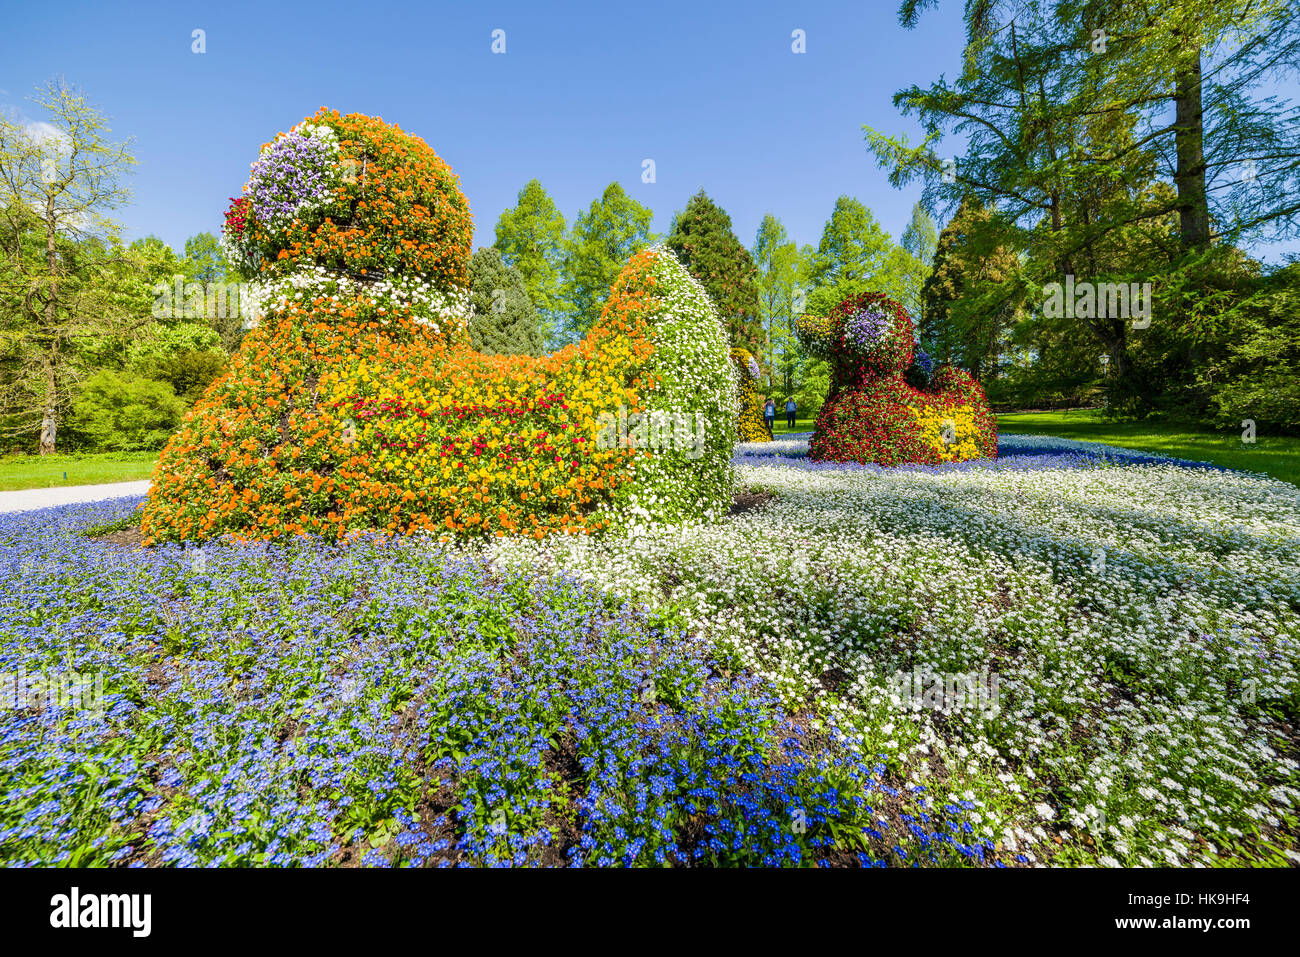 Sculpture of a duck made by blooming flowers at Island Mainau, the 'Island of flowers' at Lake Constance Stock Photo